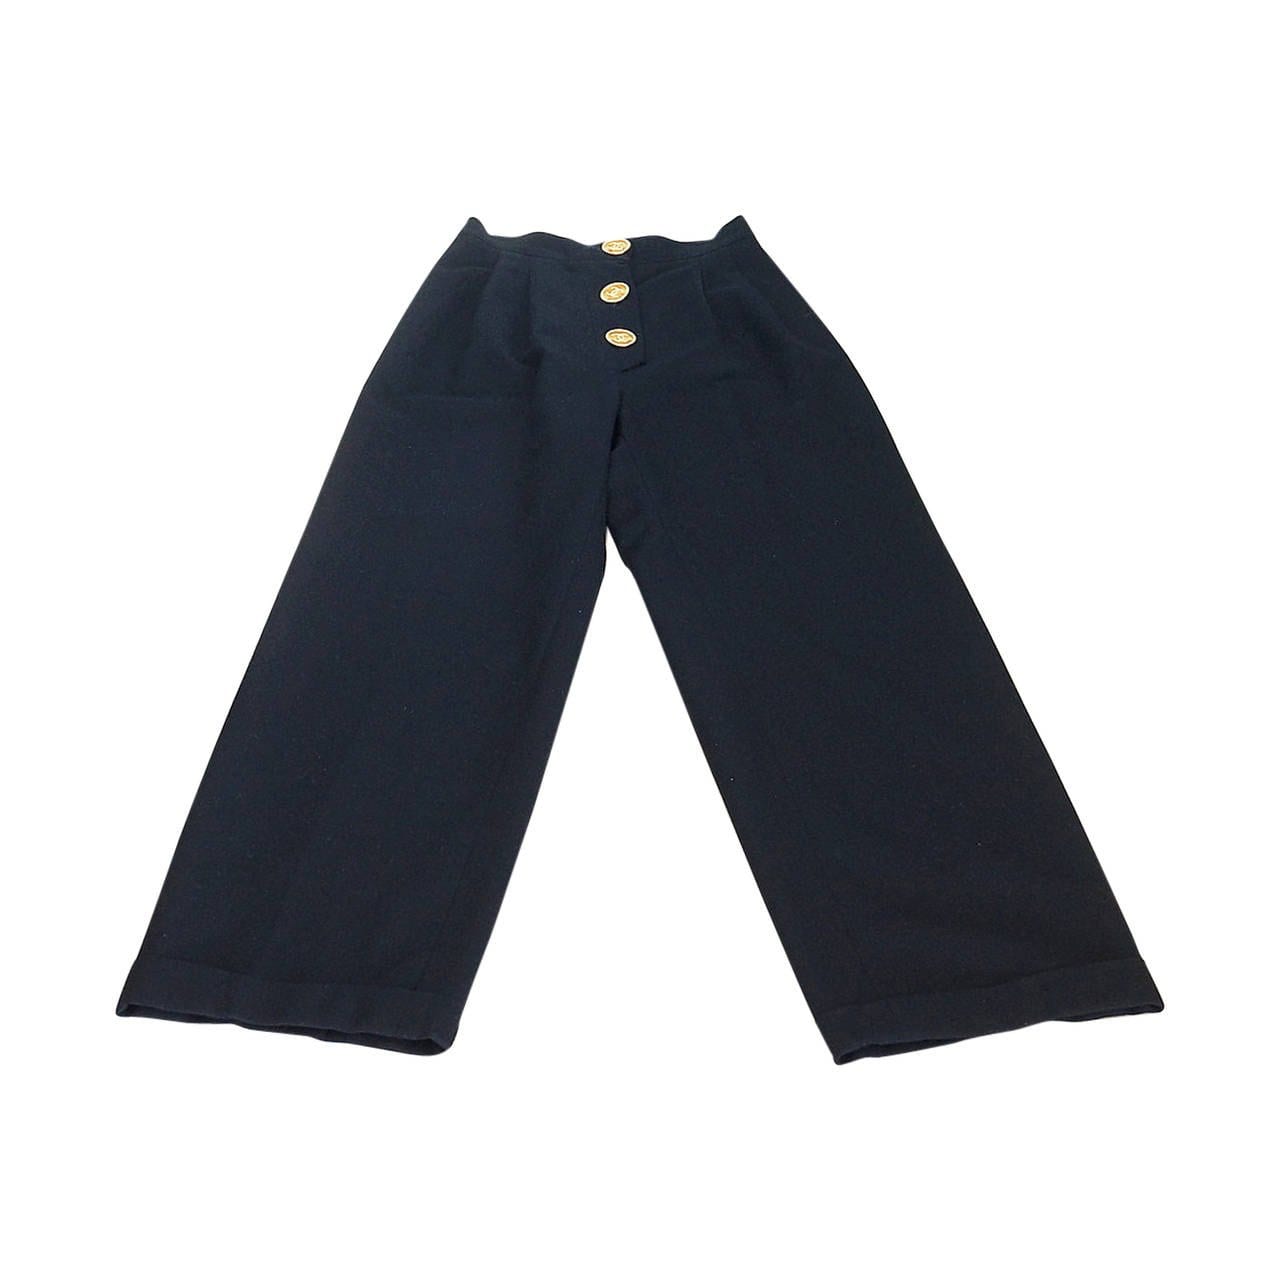 Chanel Wide Leg, High Waist Vintage Pant with CC Buttons Size 36 / 4